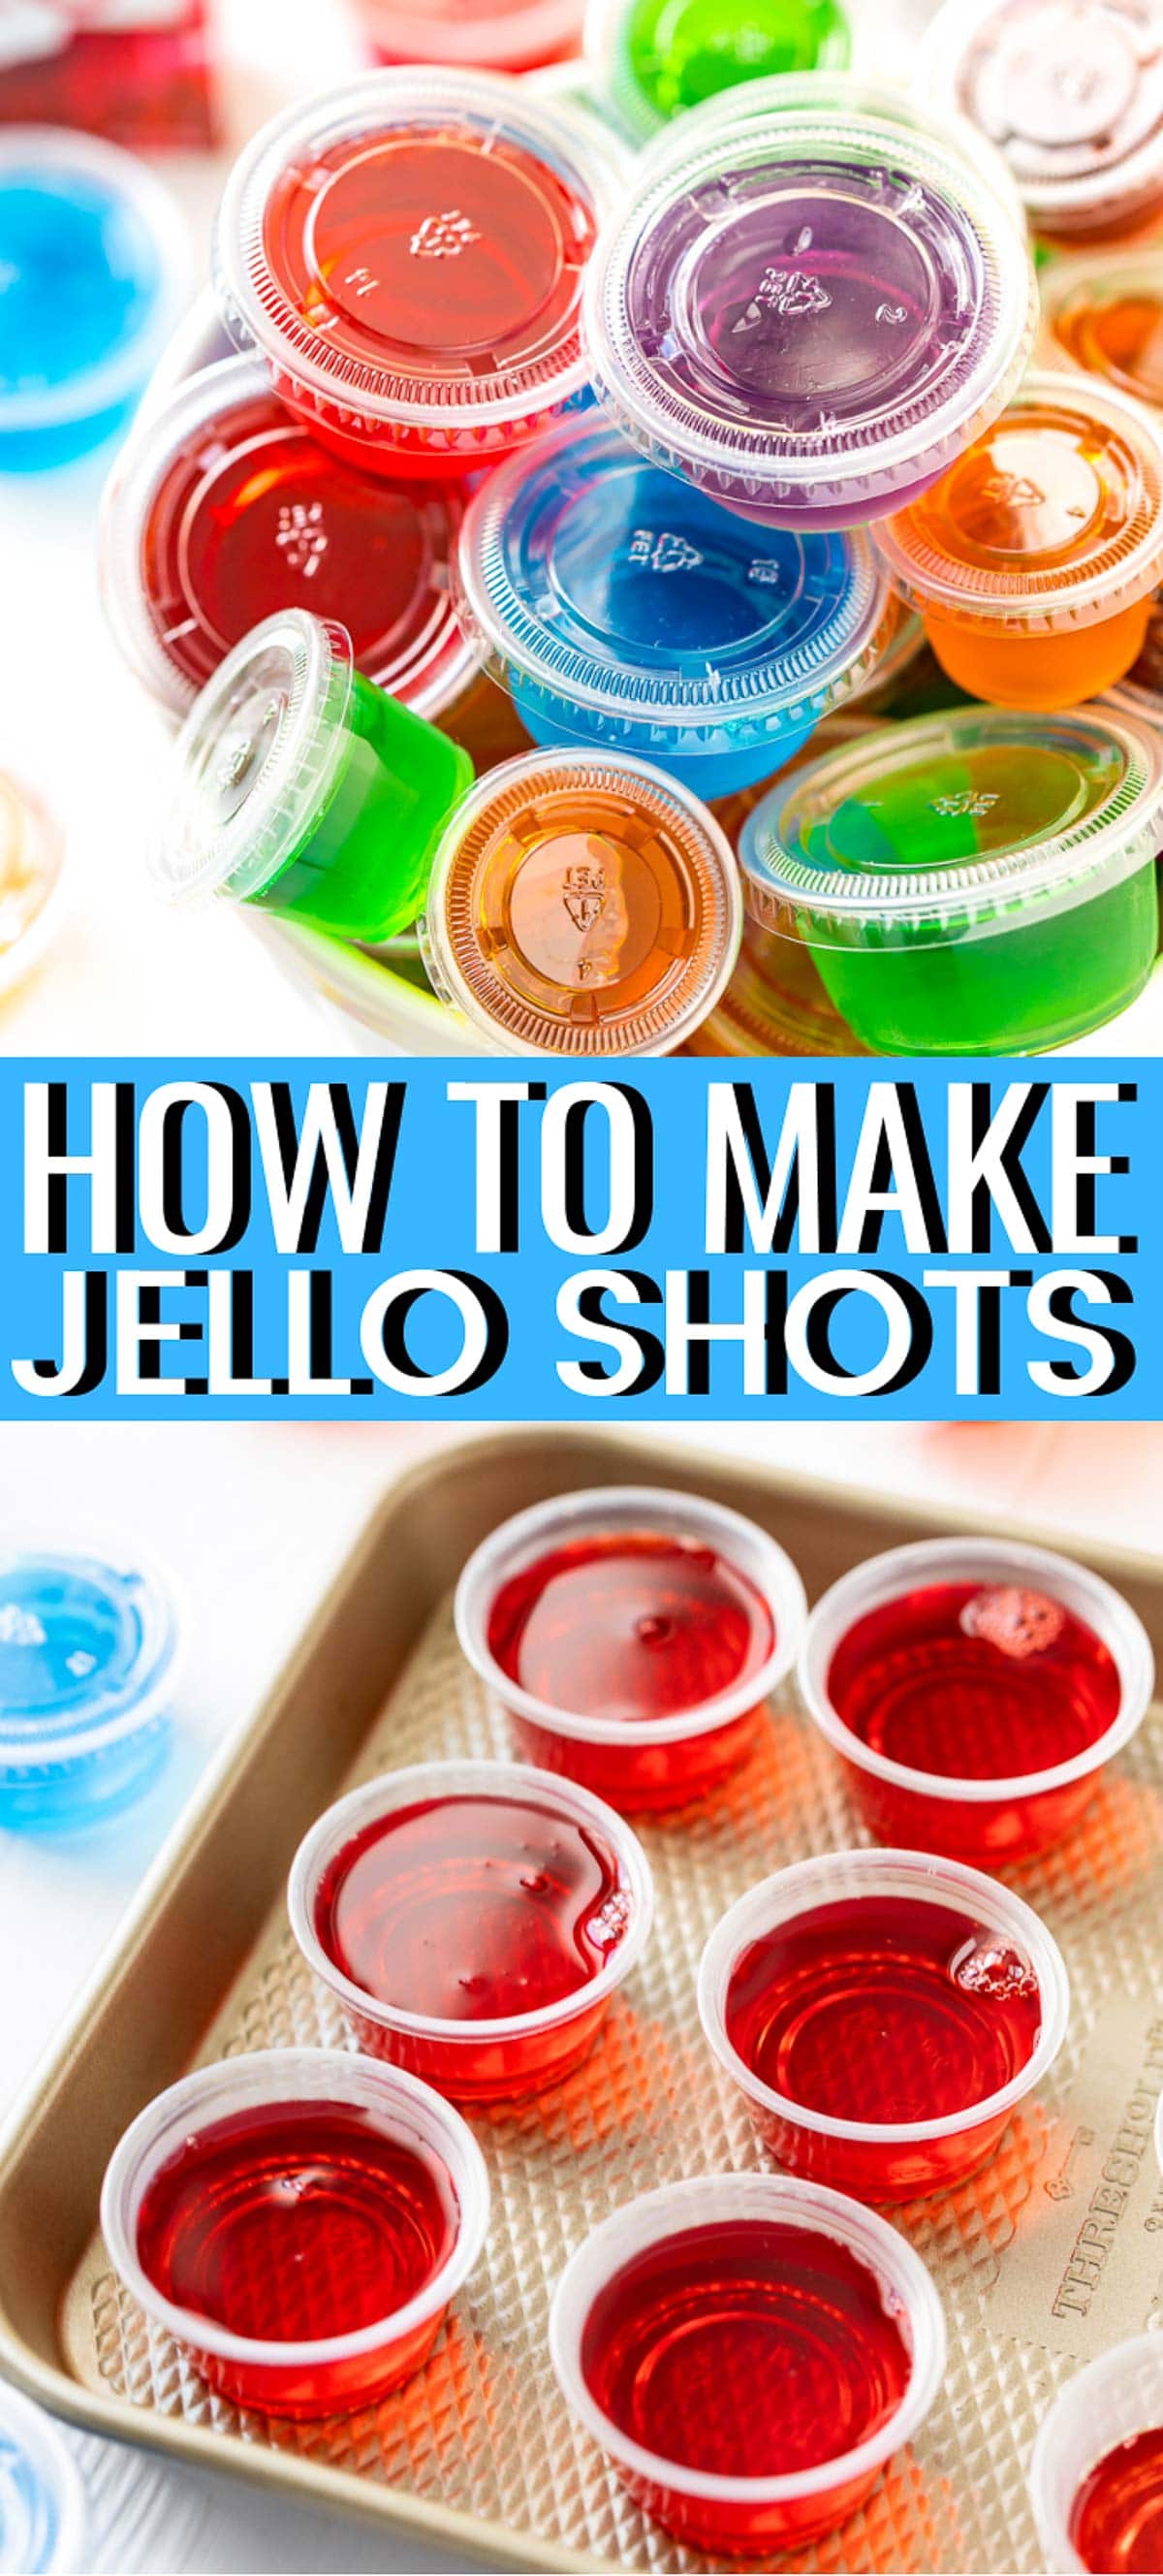 Jello Shots are a fun and easy fruity cocktail shot made with Jell-O or gelatin and alcohol! This is the Ultimate Guide for How To Make Jello Shots where I'll share tips, ideas, and some of my favorite recipes for your next party! via @sugarandsoulco